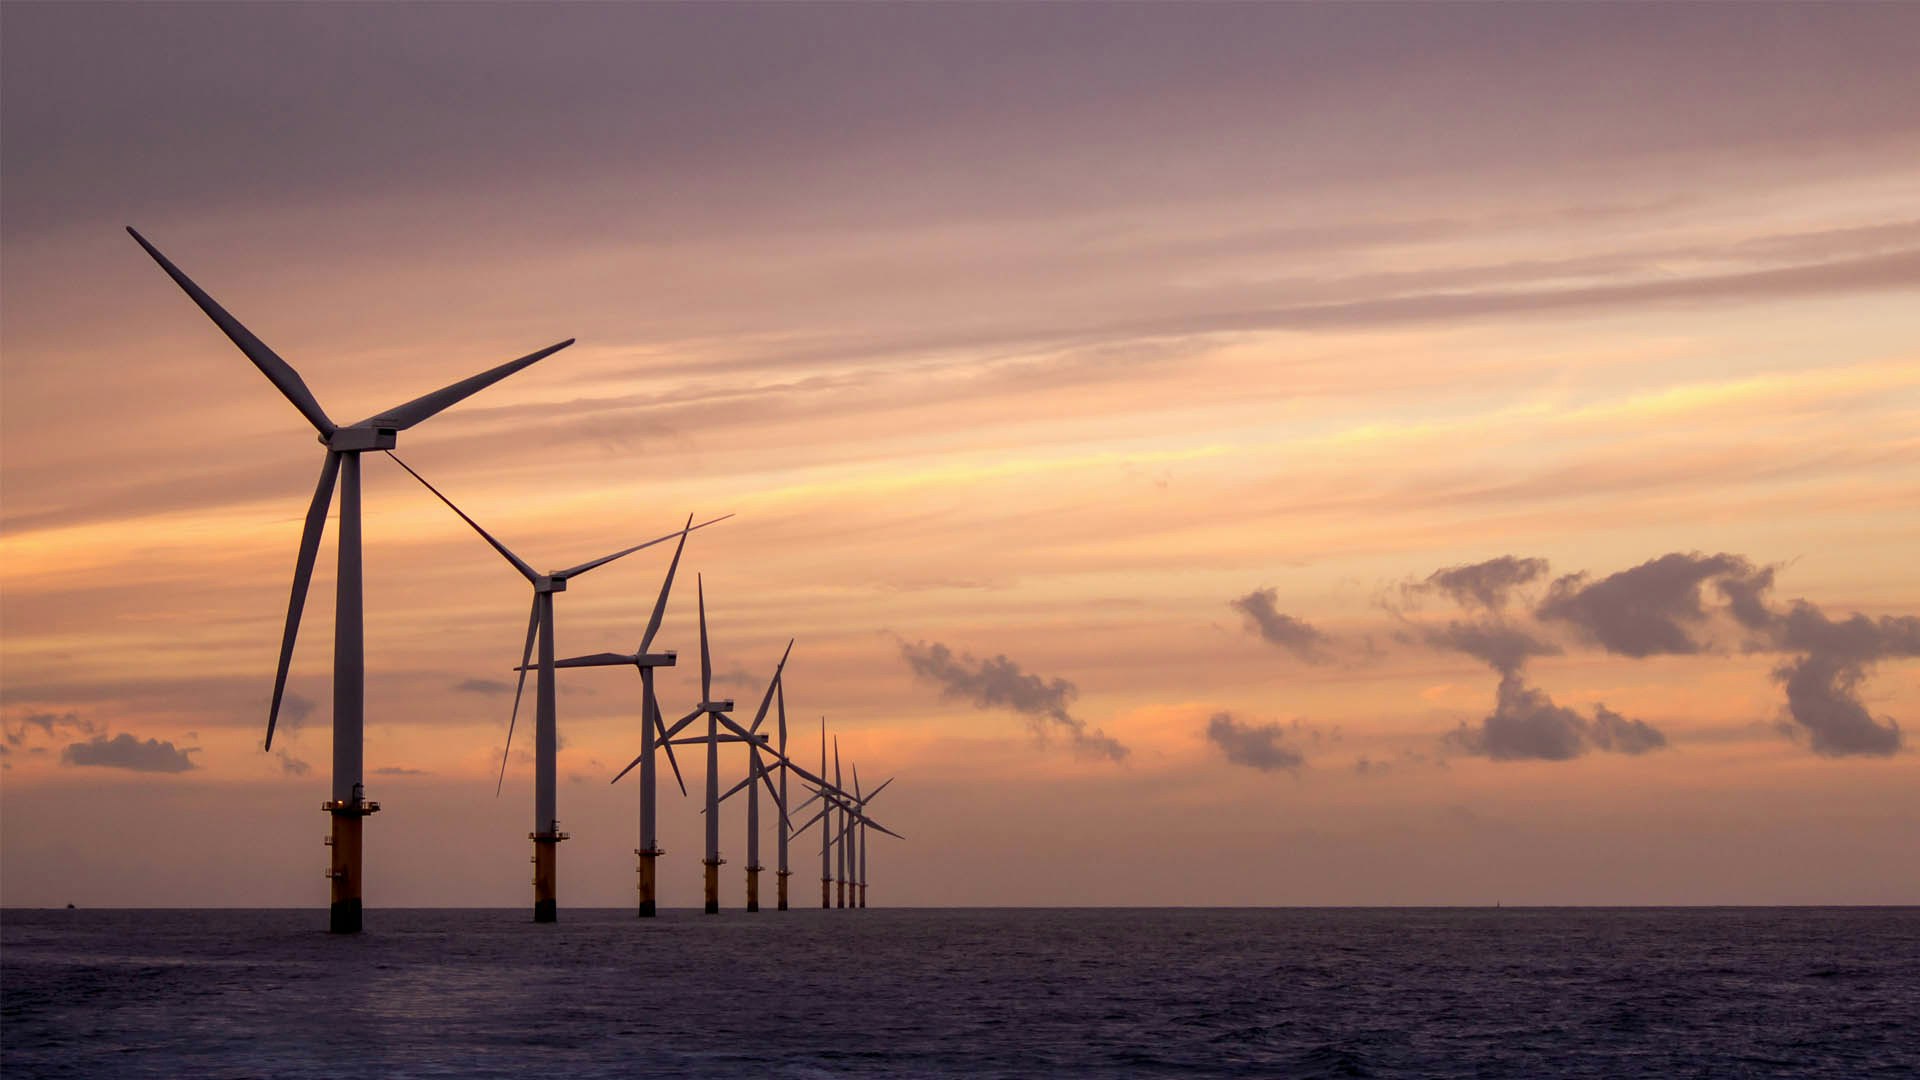 Offshore wind turbines at dawn